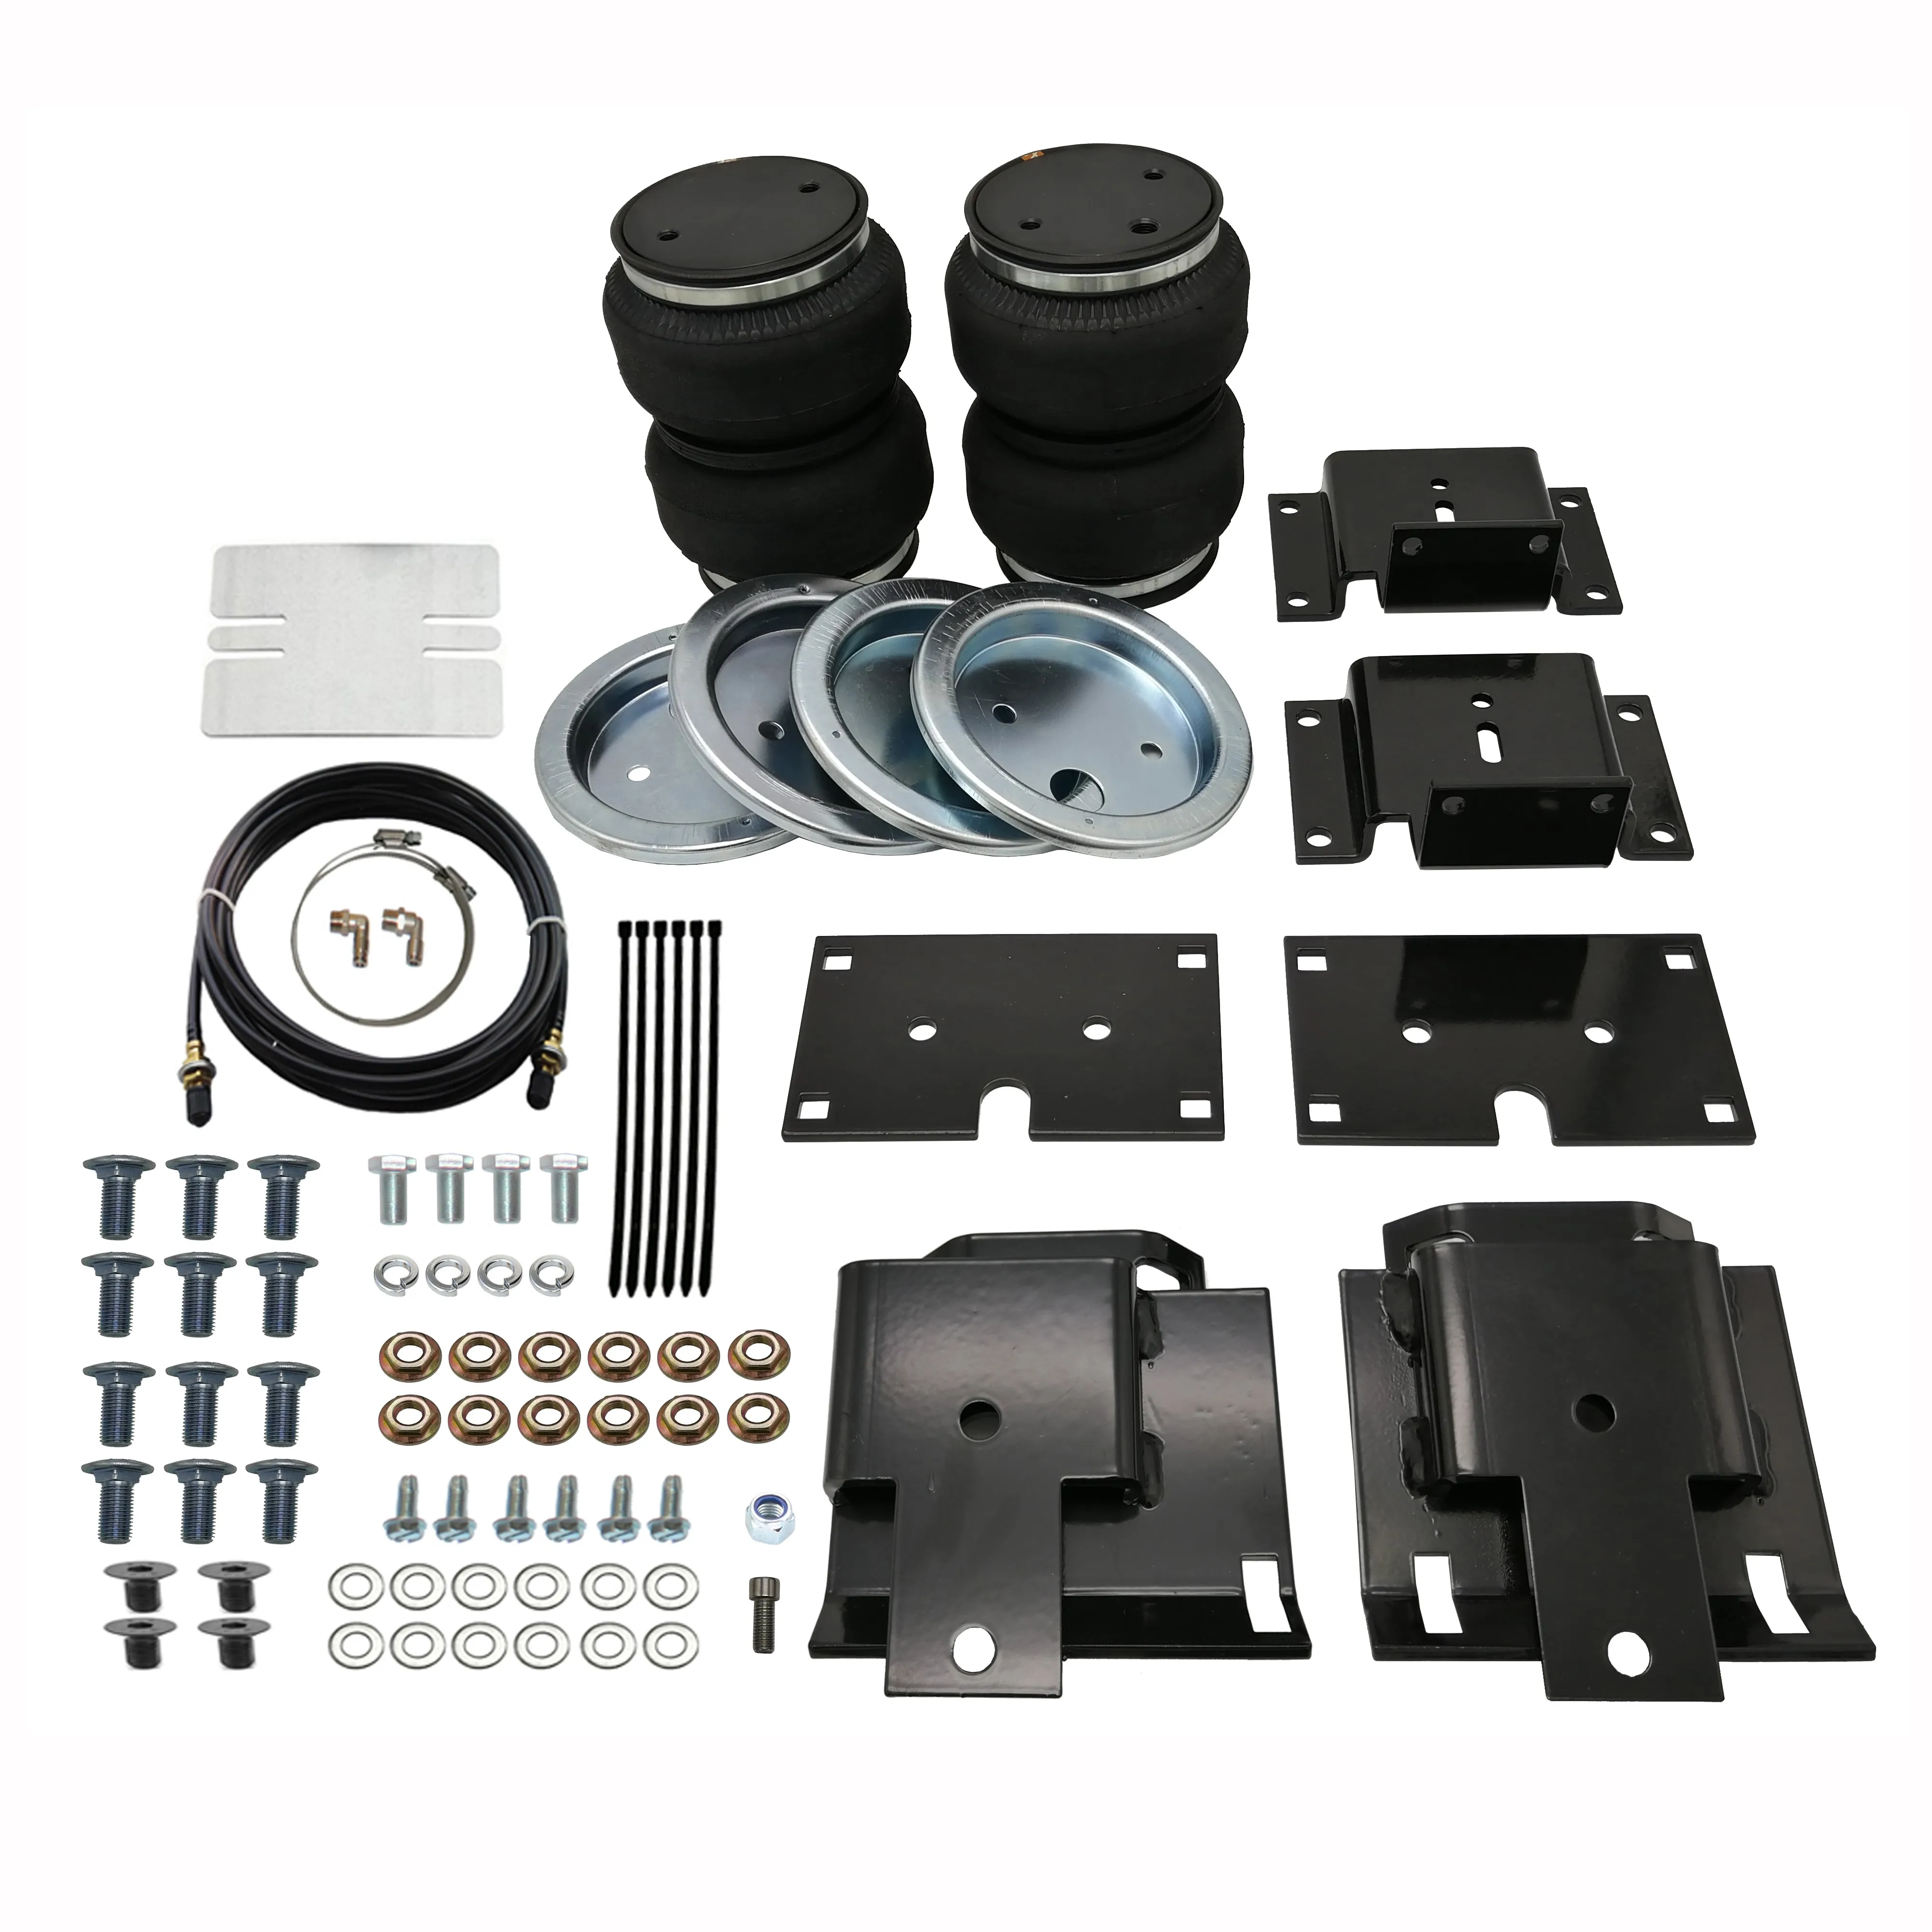 

2009-2018 Dodge Ram1500 2WD / 4WD Truck Air Suspension Kit, Airlift Towing Kit